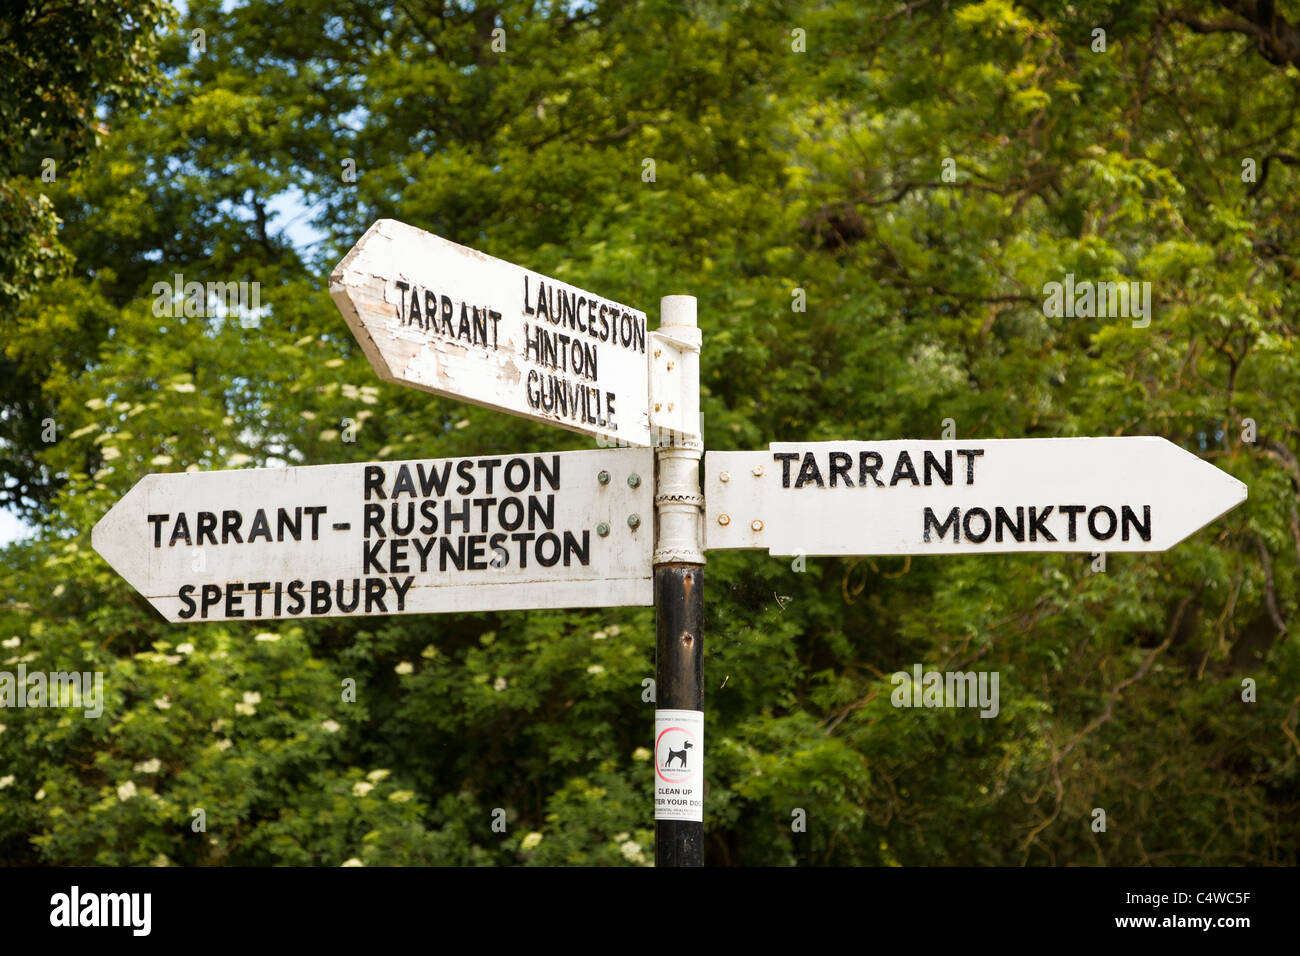 Signpost showing local directions to The Tarrants villages in Dorset, England, UK Stock Photo